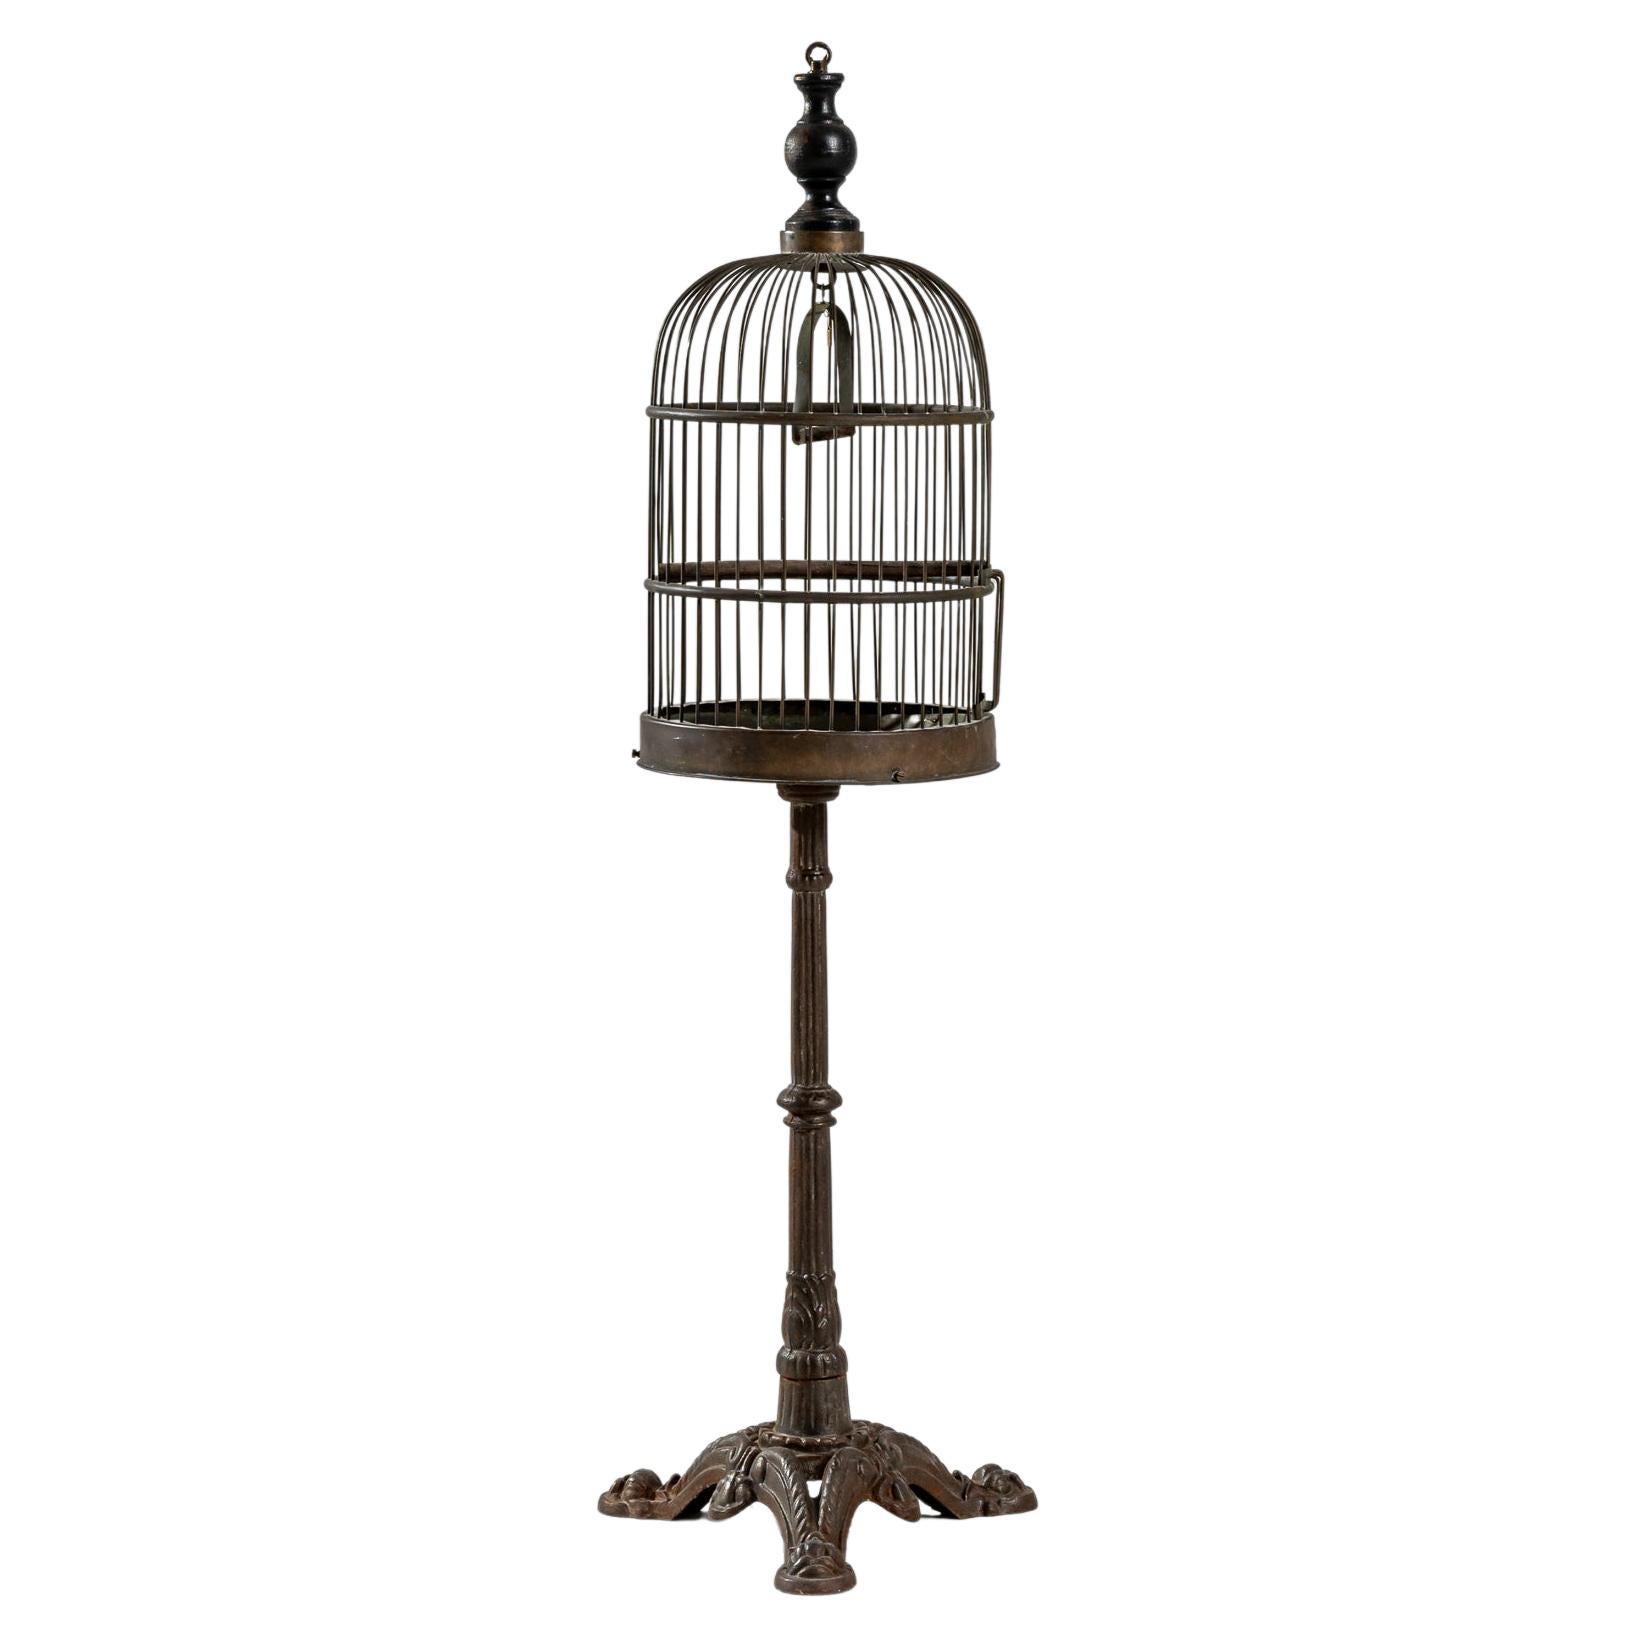 Early 20th Century French Metal Birdcage on Stand